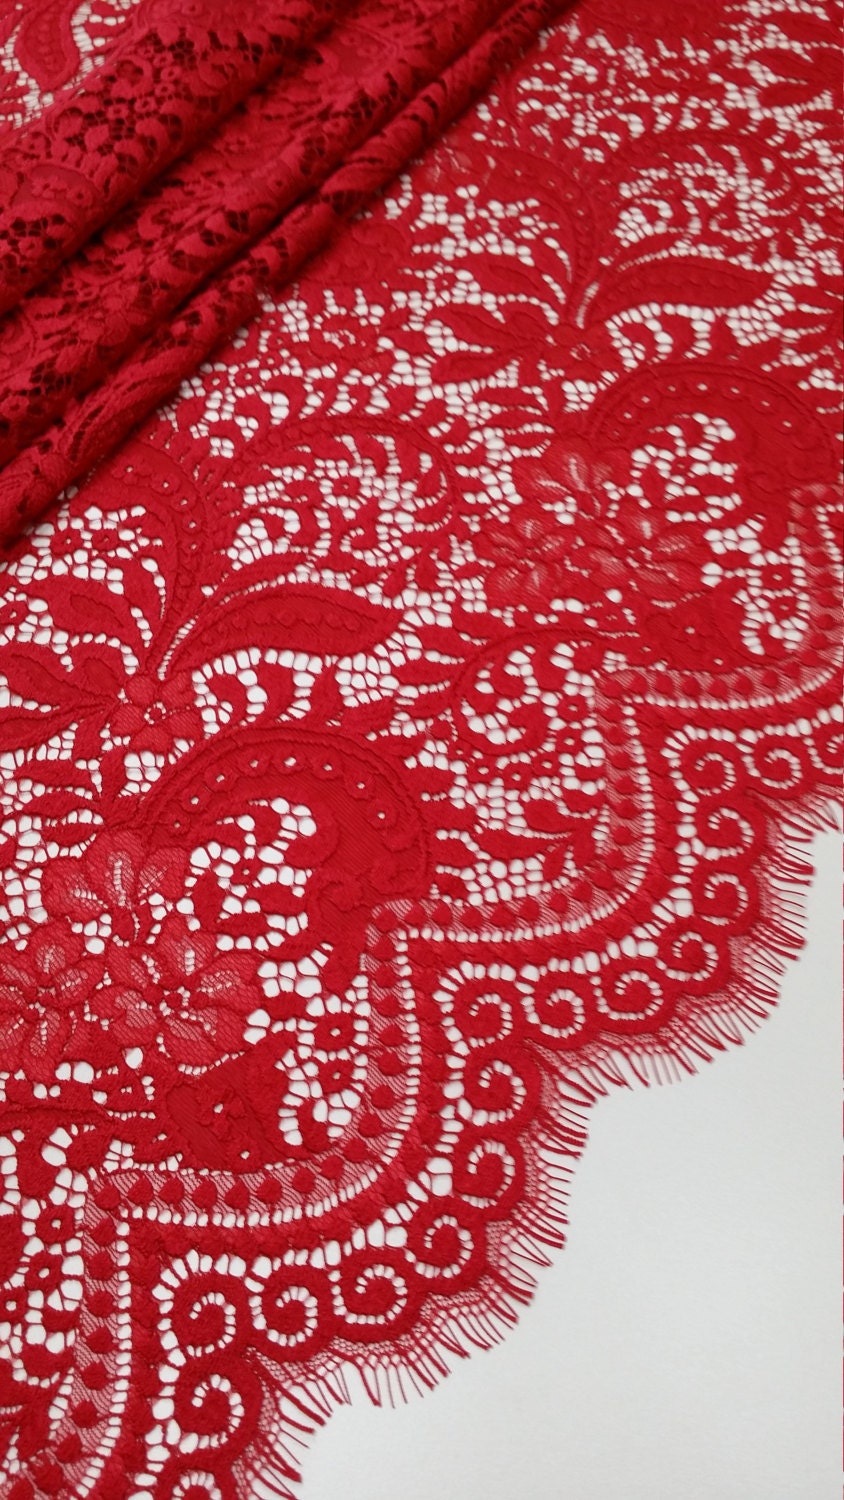 Red lace fabric Chantilly lace French lace Bridal lace | Etsy